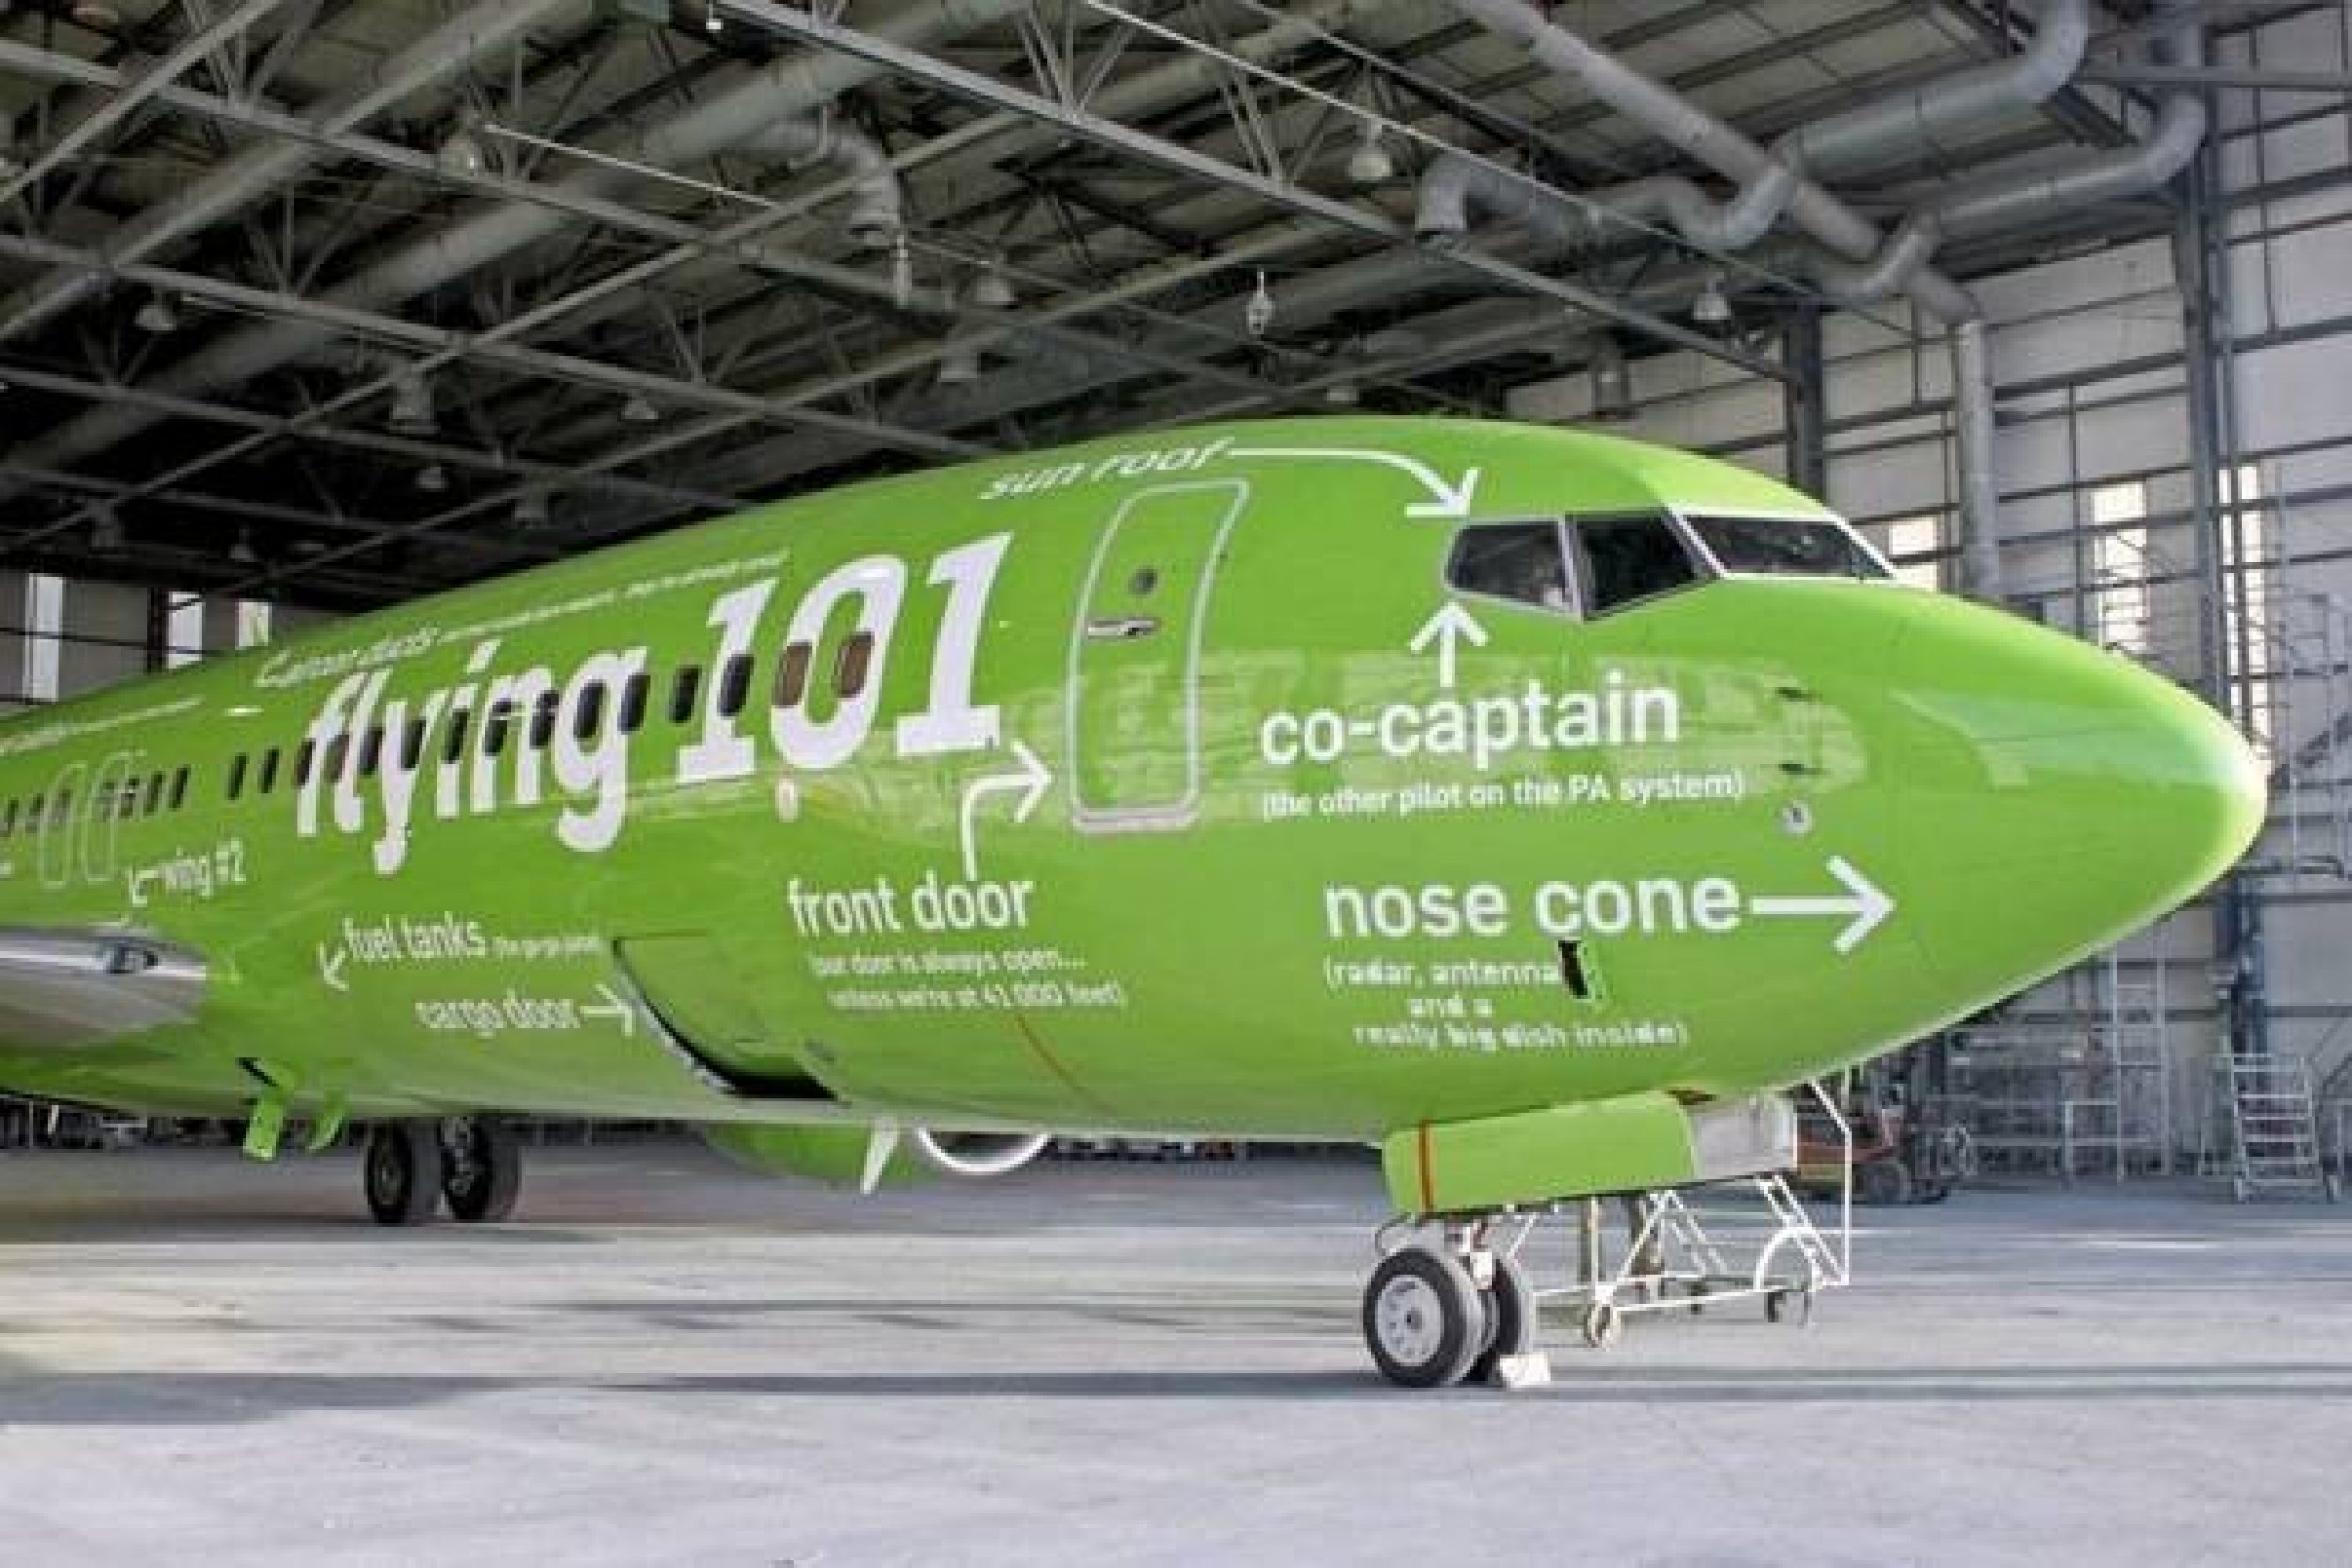 Kulula loves to have fun with its airplane designs. In case you didnt know the different parts of an airplane, this jet tells you what everything is. Heres a view from the right side of the plane, which also tells you where the cargo door goes and where